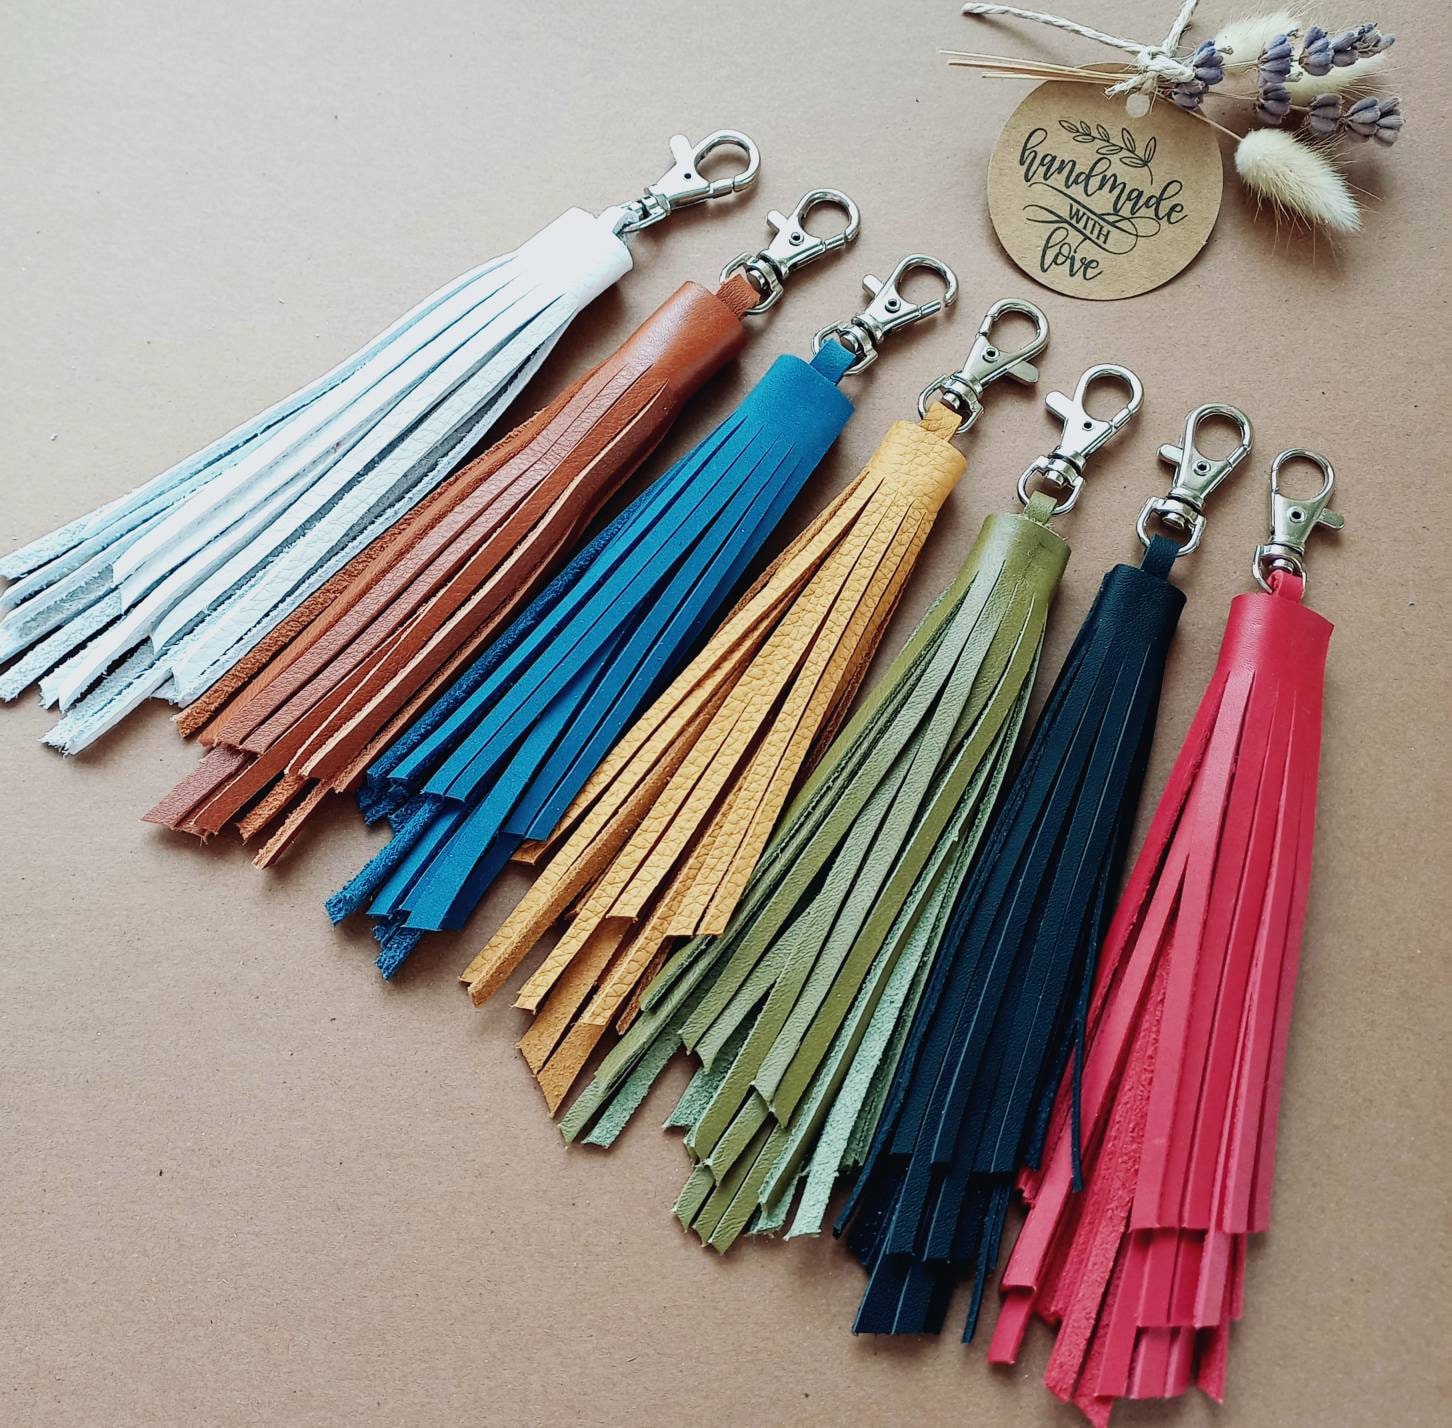 Tassel Leather Tassel Keychain Bulk Set For DIY Leather And Acrylic Jewelry  Accessories From Ronnyturiaf, $15.56